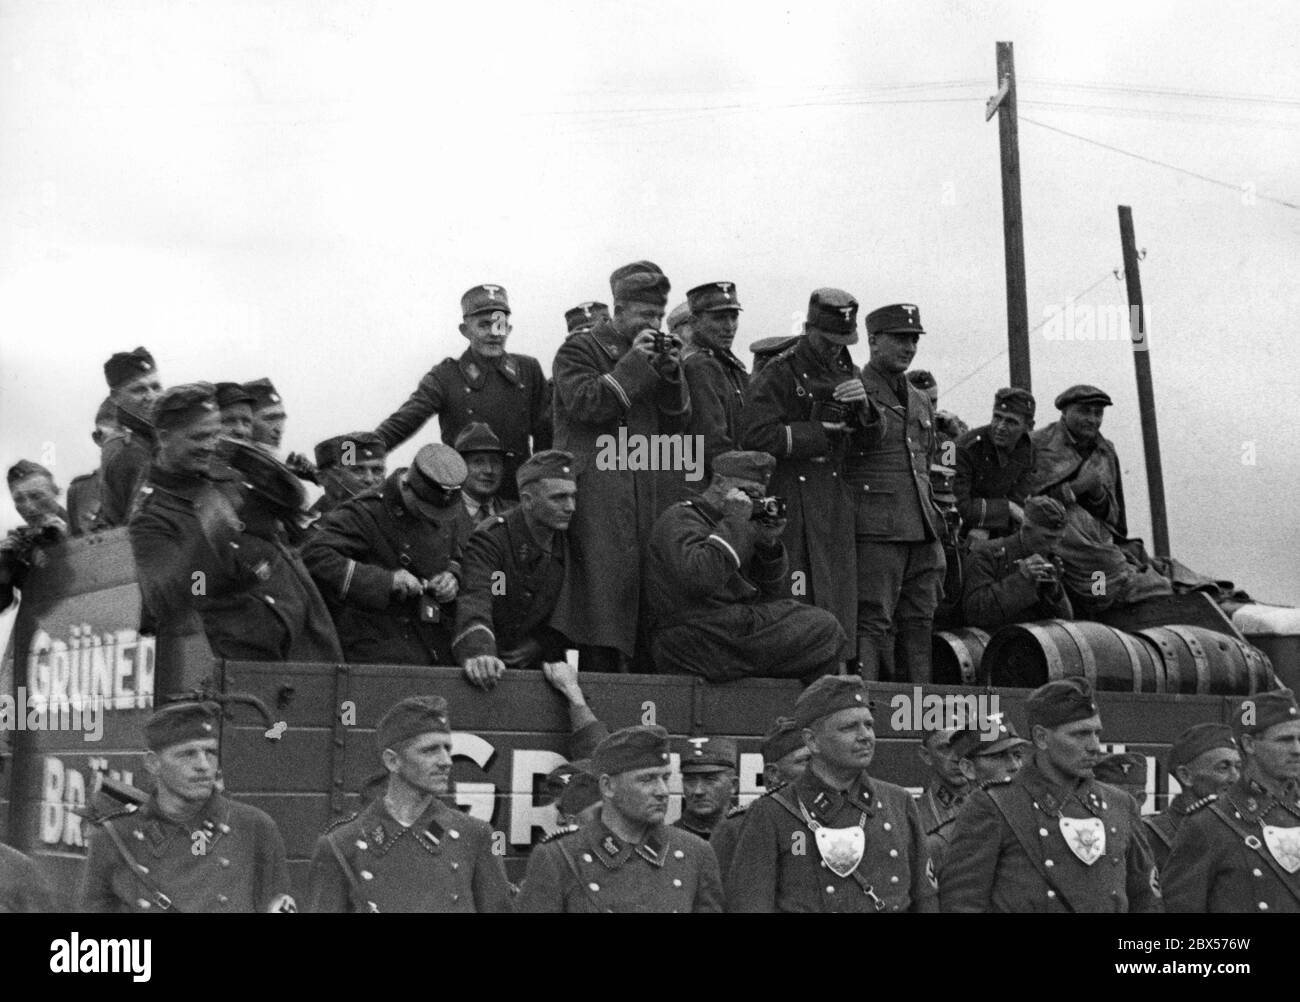 During Joseph Goebbels' visit to the Langwasser camp, where the SA of Greater Berlin is stationed, SA men are standing on a truck of 'Gruener Braeu' to pose for a good souvenir photo. Stock Photo